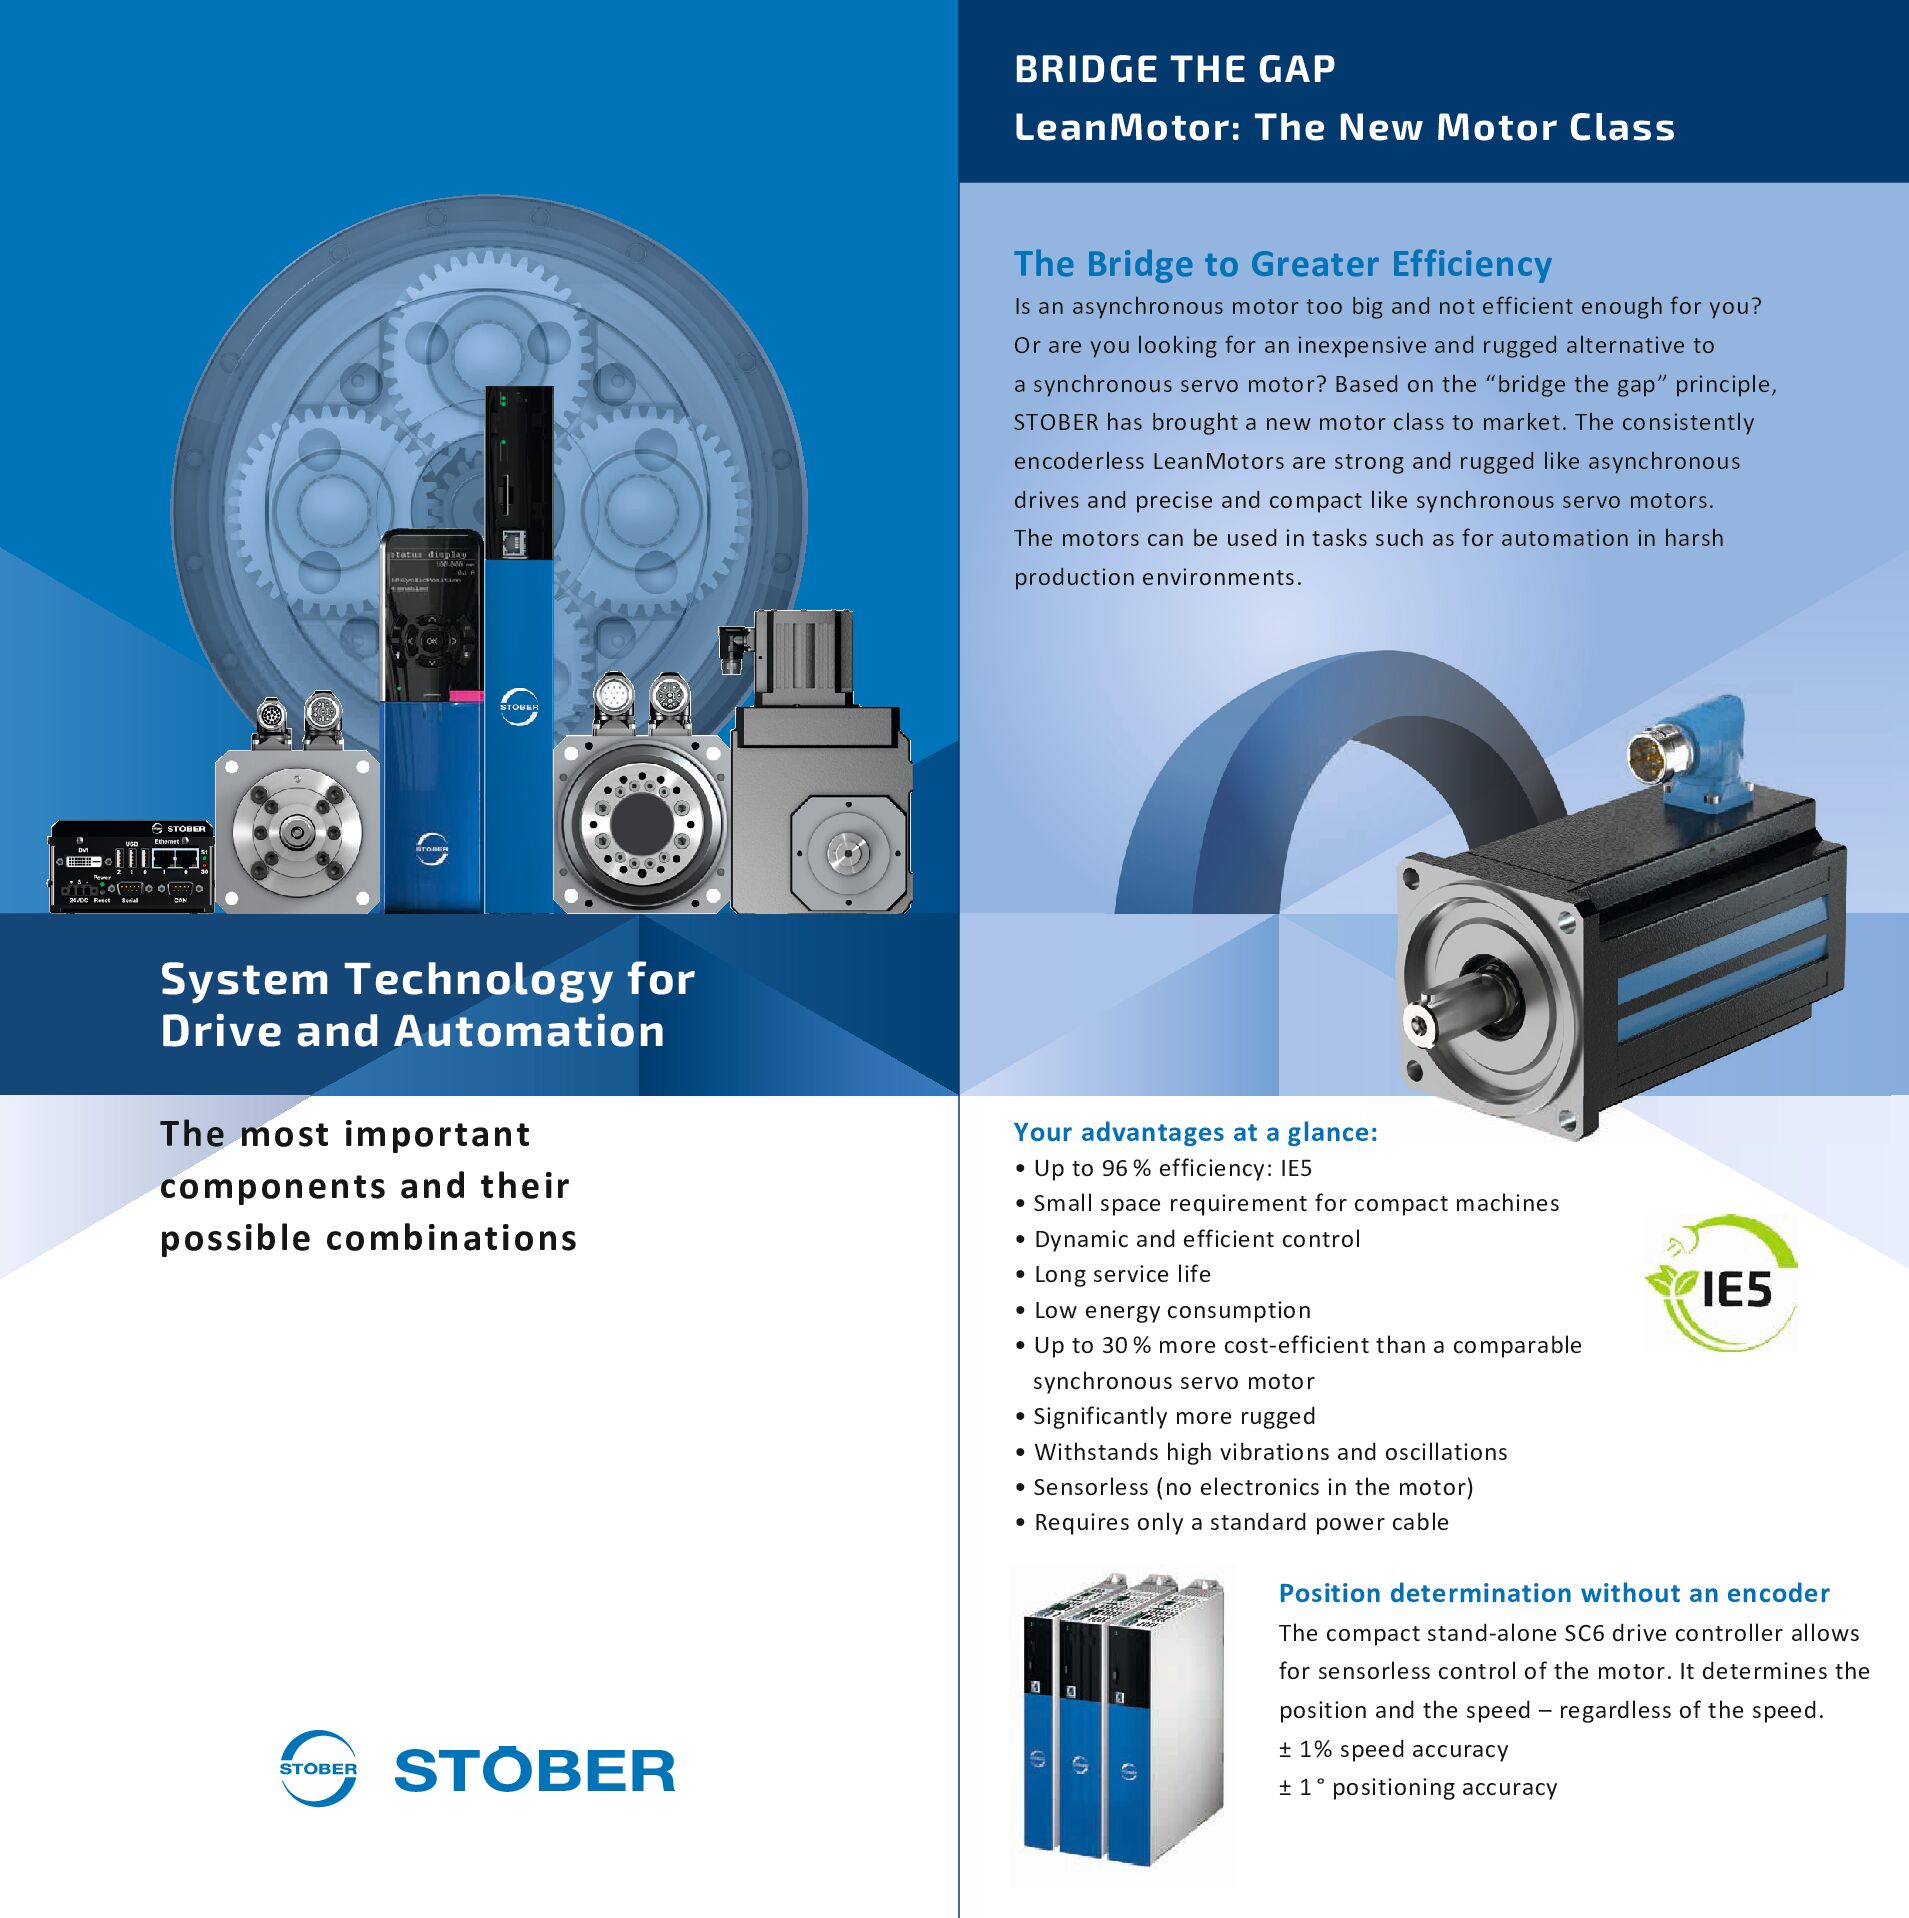 System Technology for Drive and Automation